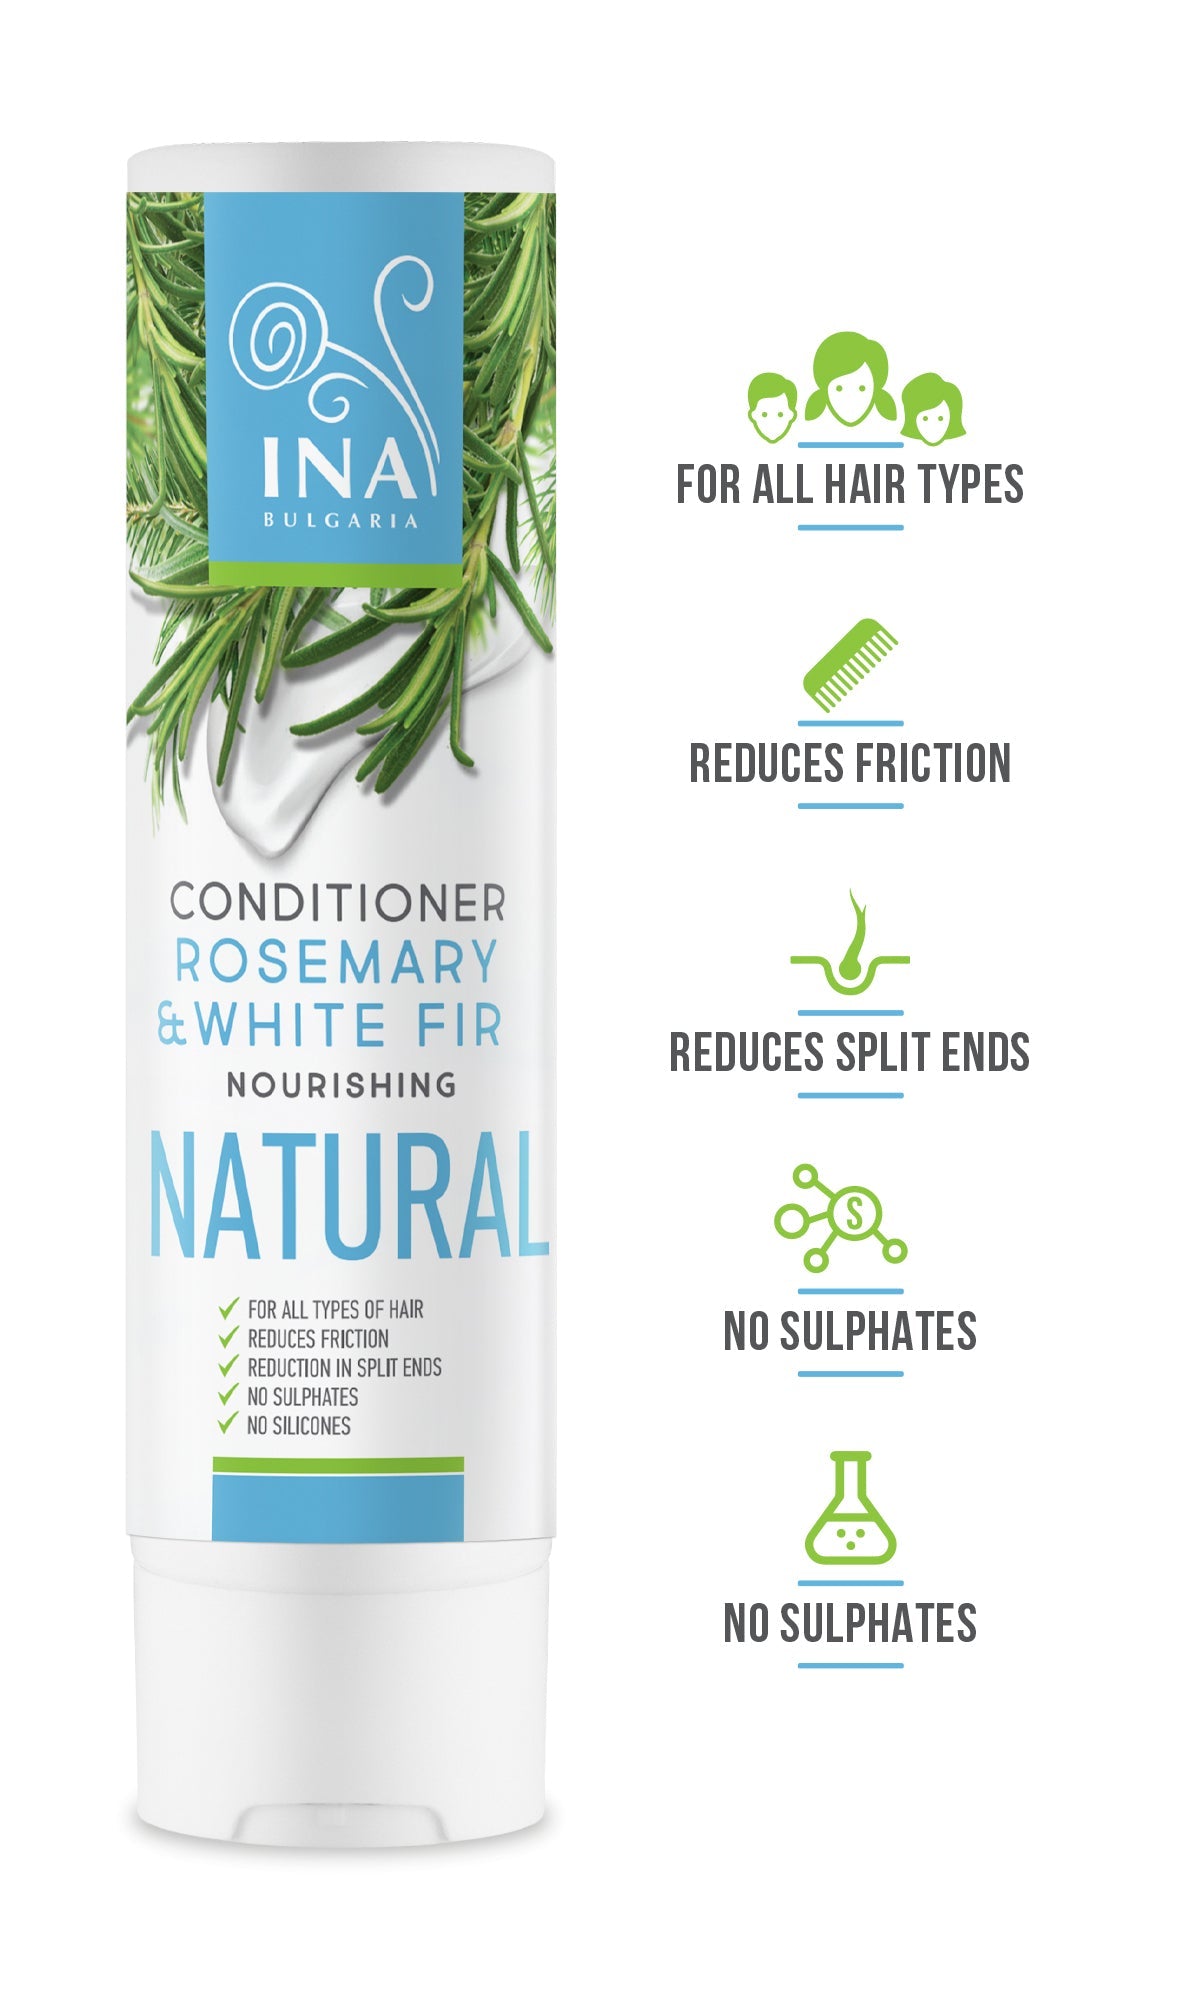 Natural Hair Conditioner with Rosemary oil and White Fir - intensive nourishing care for every hair type